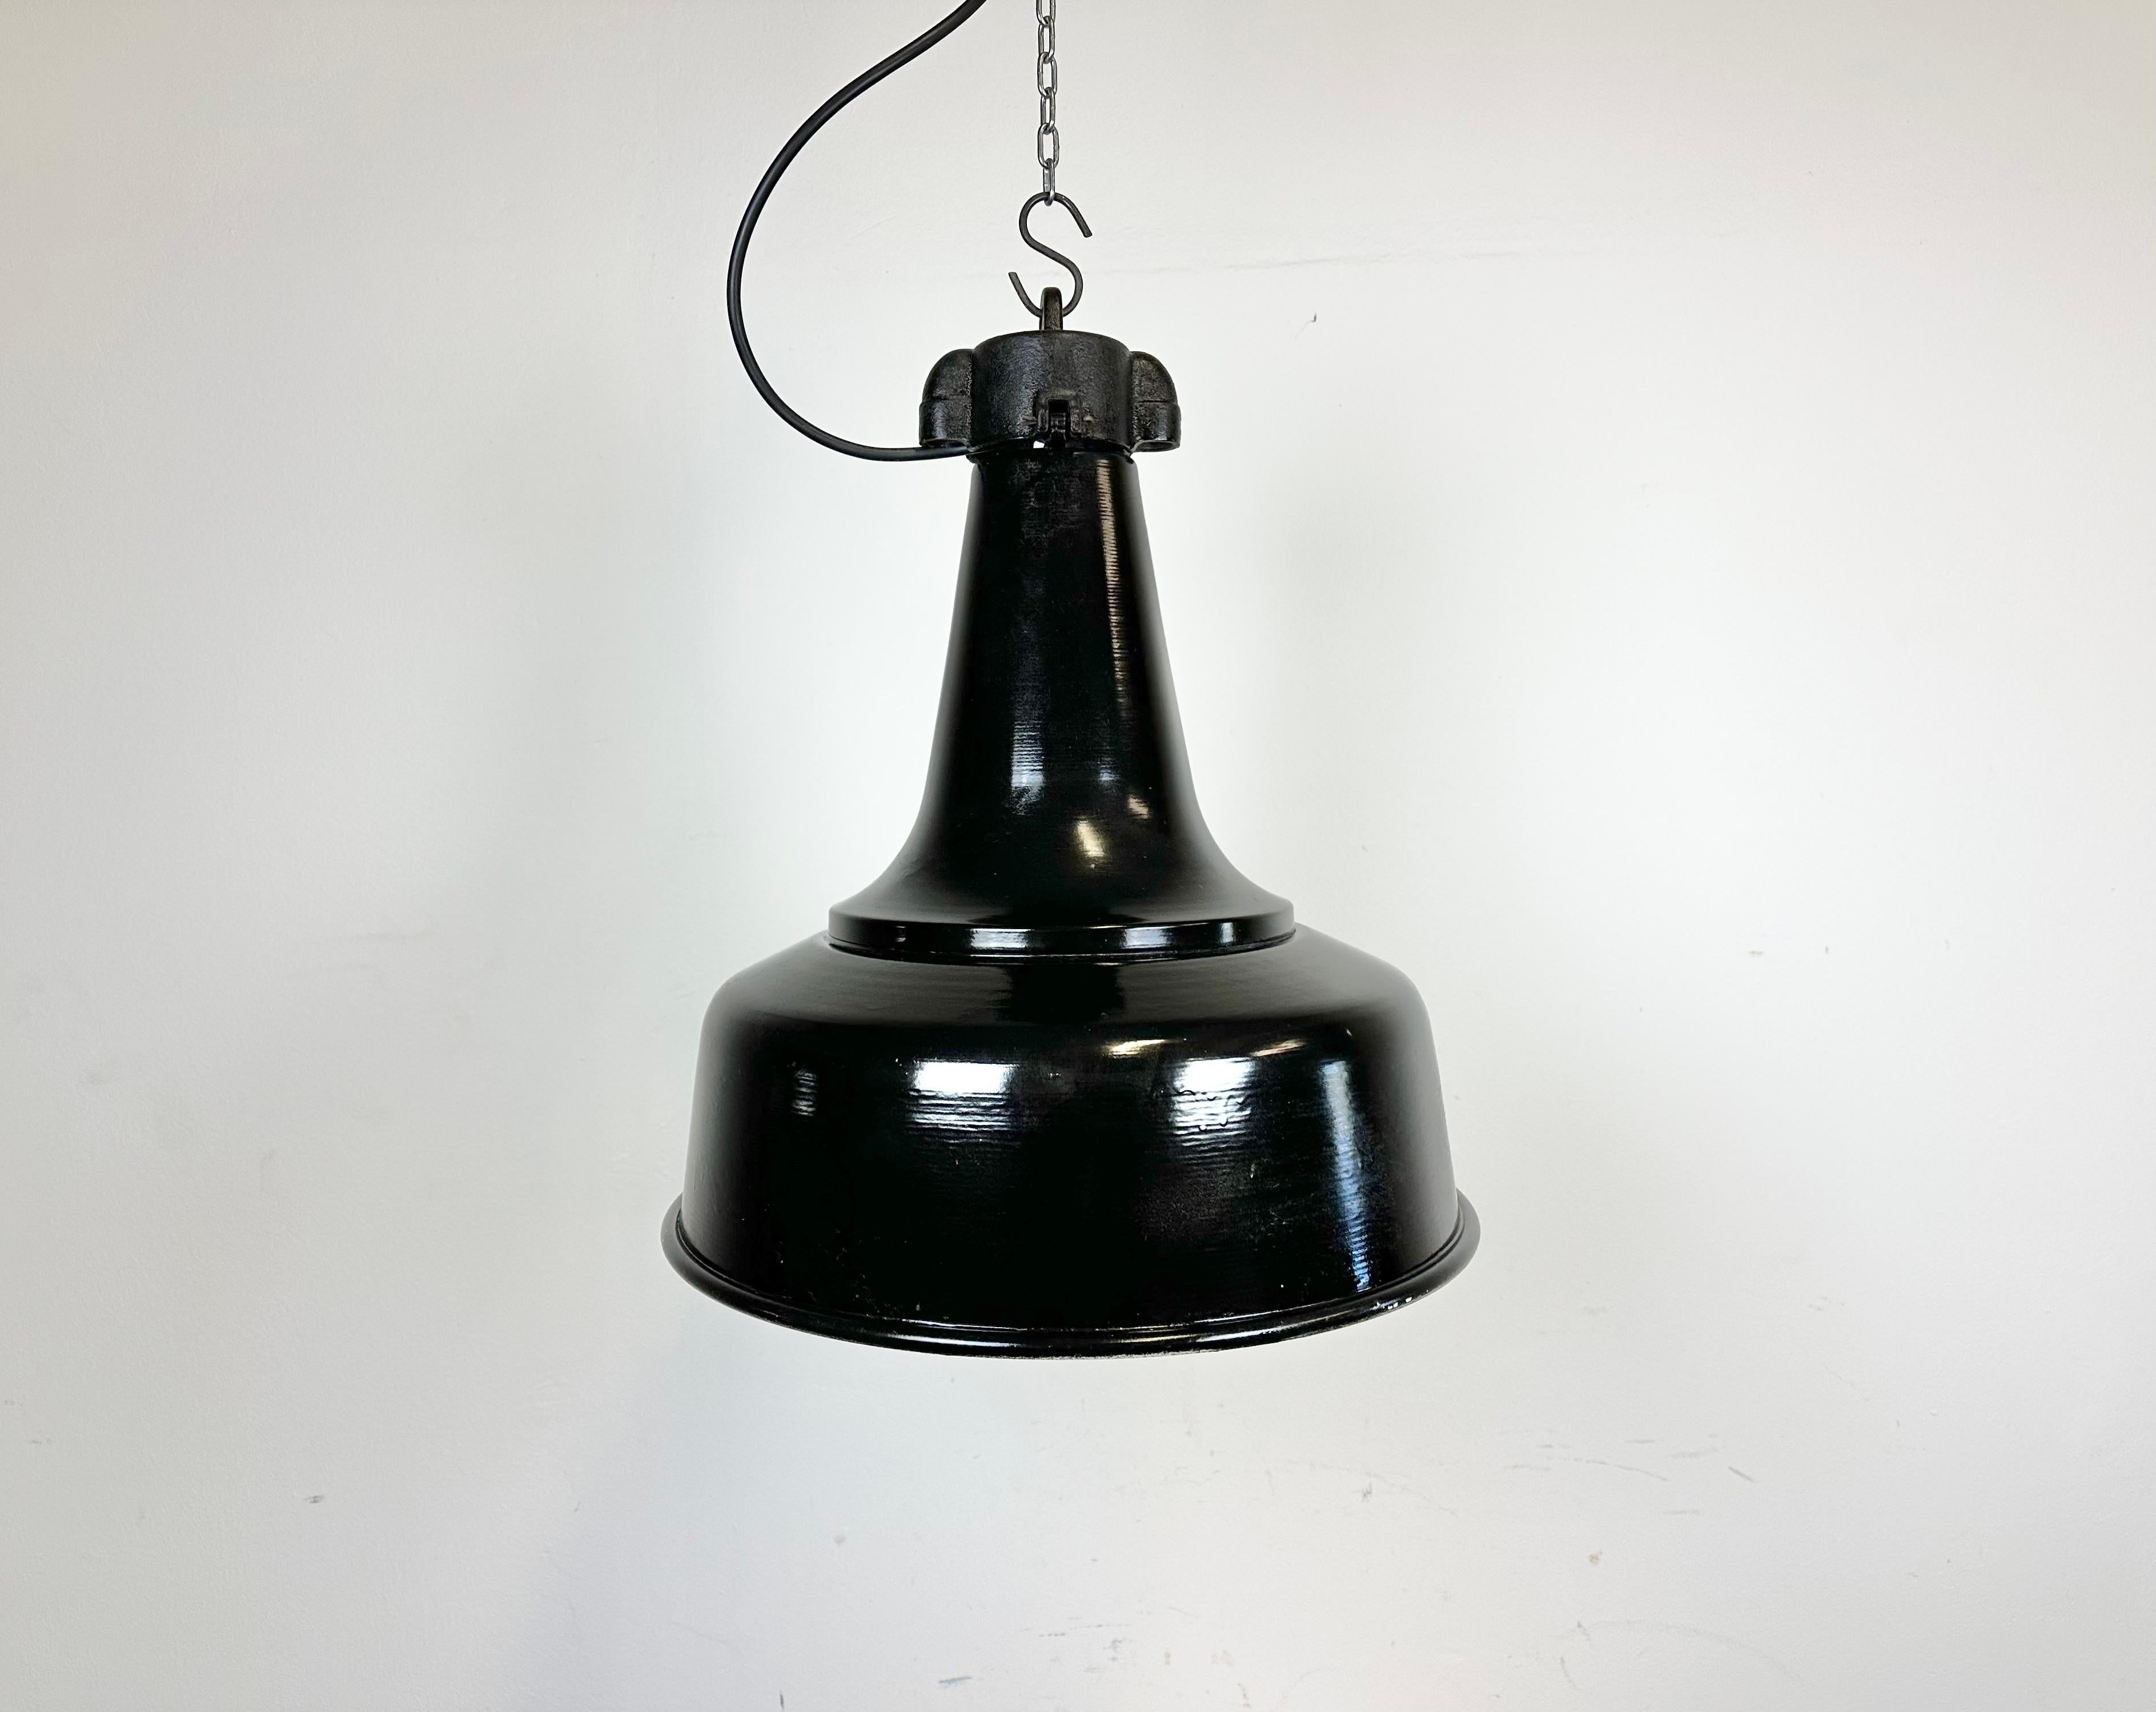 Industrial iron black painted pendant light made by in former Czechoslovakia during the 1970s. White inside the shade. Cast iron top. The porcelain socket requires standard E 27/ E26 light bulbs. New wire. Fully functional. The weight of the lamp is